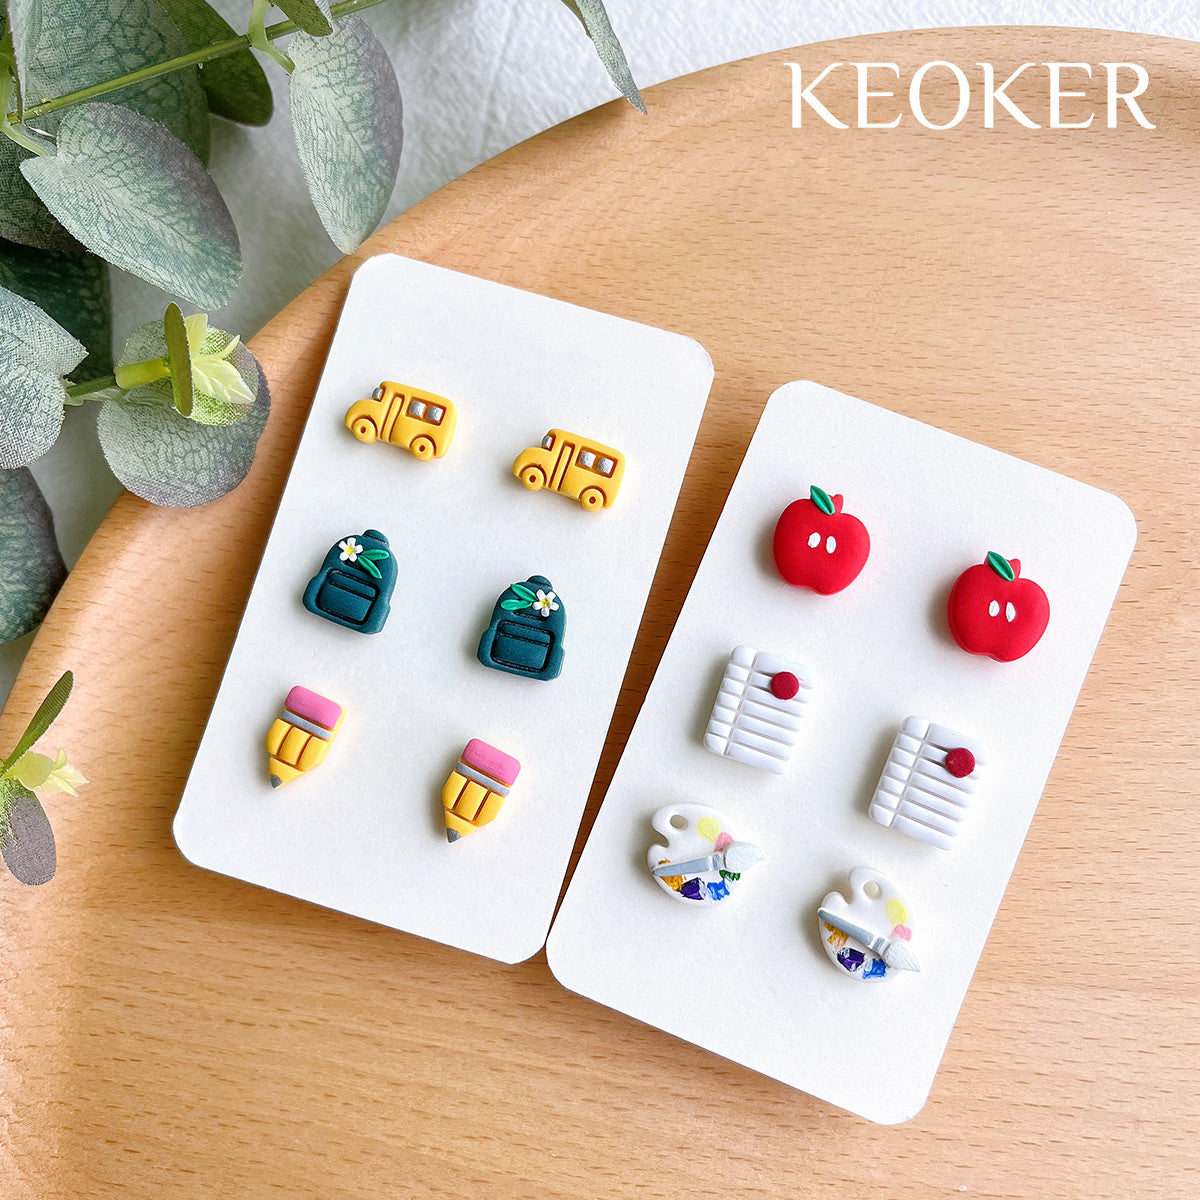  KEOKER Clay Cutters for Polymer Clay Jewelry, Fruit Polymer  Clay Cutters for Earrings Jewelry Making, 12 Shapes Fruit Plant Clay  Earrings Cutters, Clay Cutters